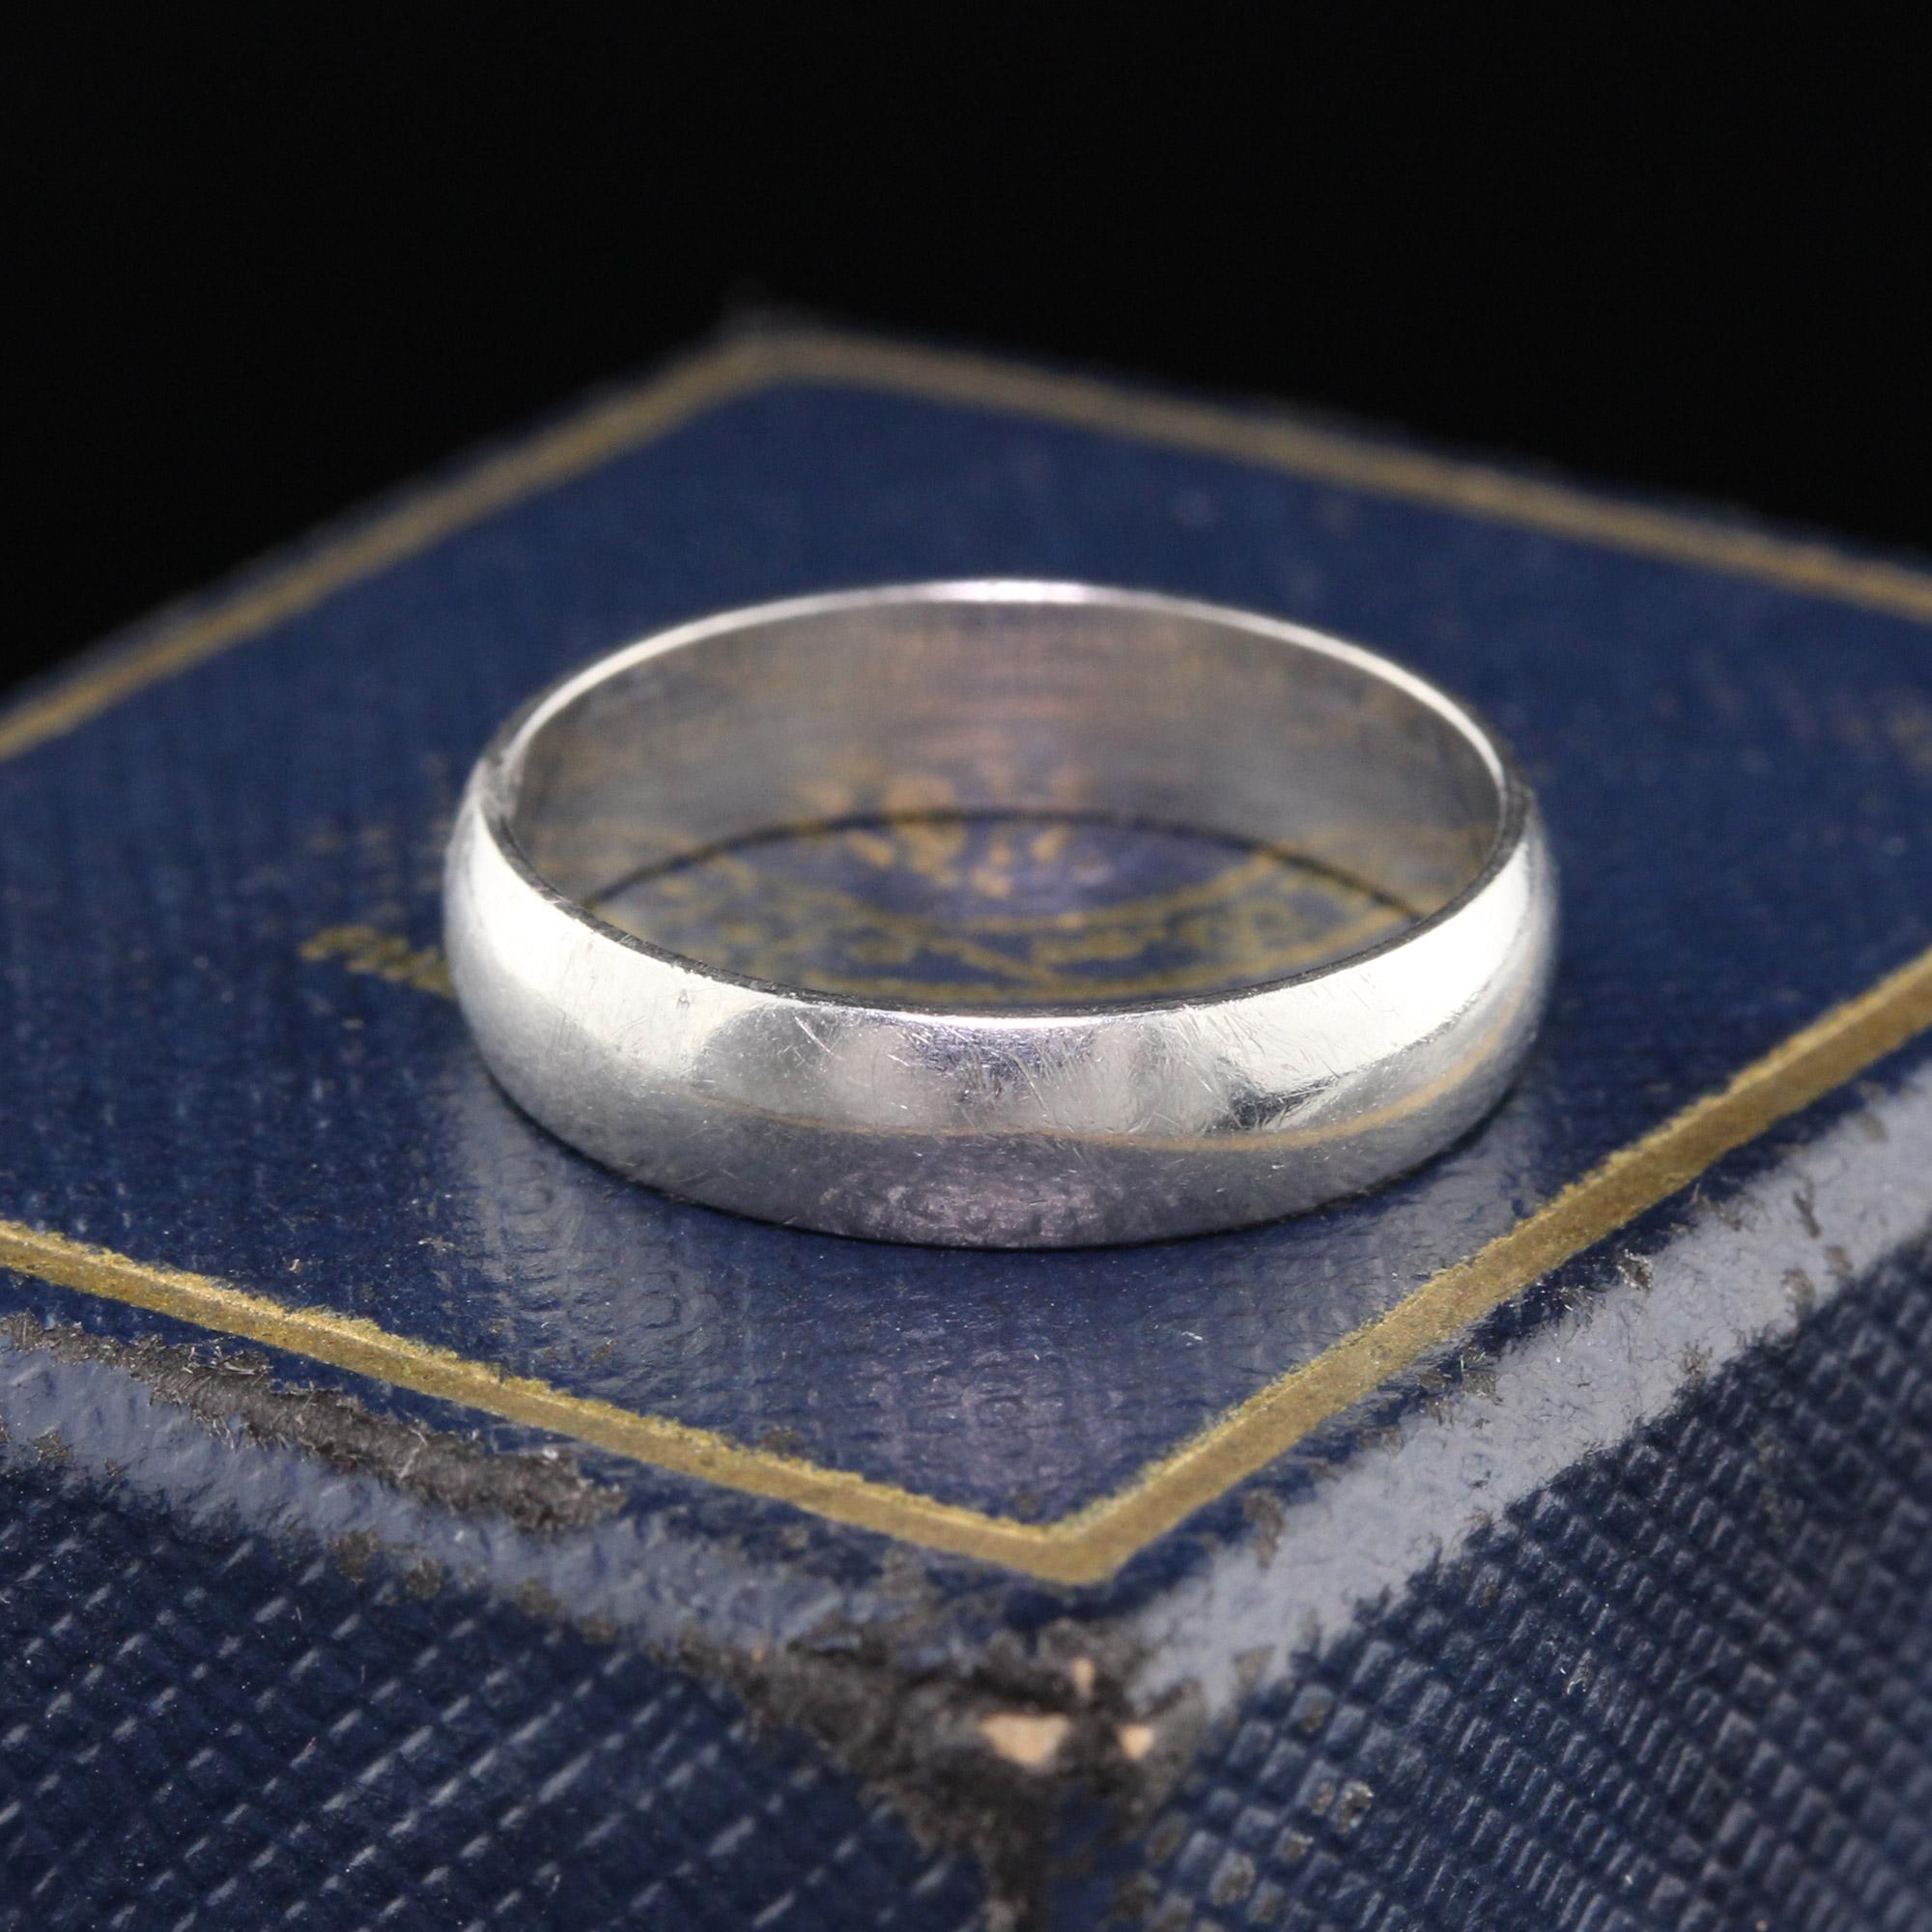 Simple vintage estate platinum wedding band!

#R0219

Metal: Platinum

Weight: 4 Grams

Ring Size: 5 (sizable)

This ring can be sized for a $30 fee!

*Please note that we cannot accept returns on sized rings.

Measurements: 4.05 mm